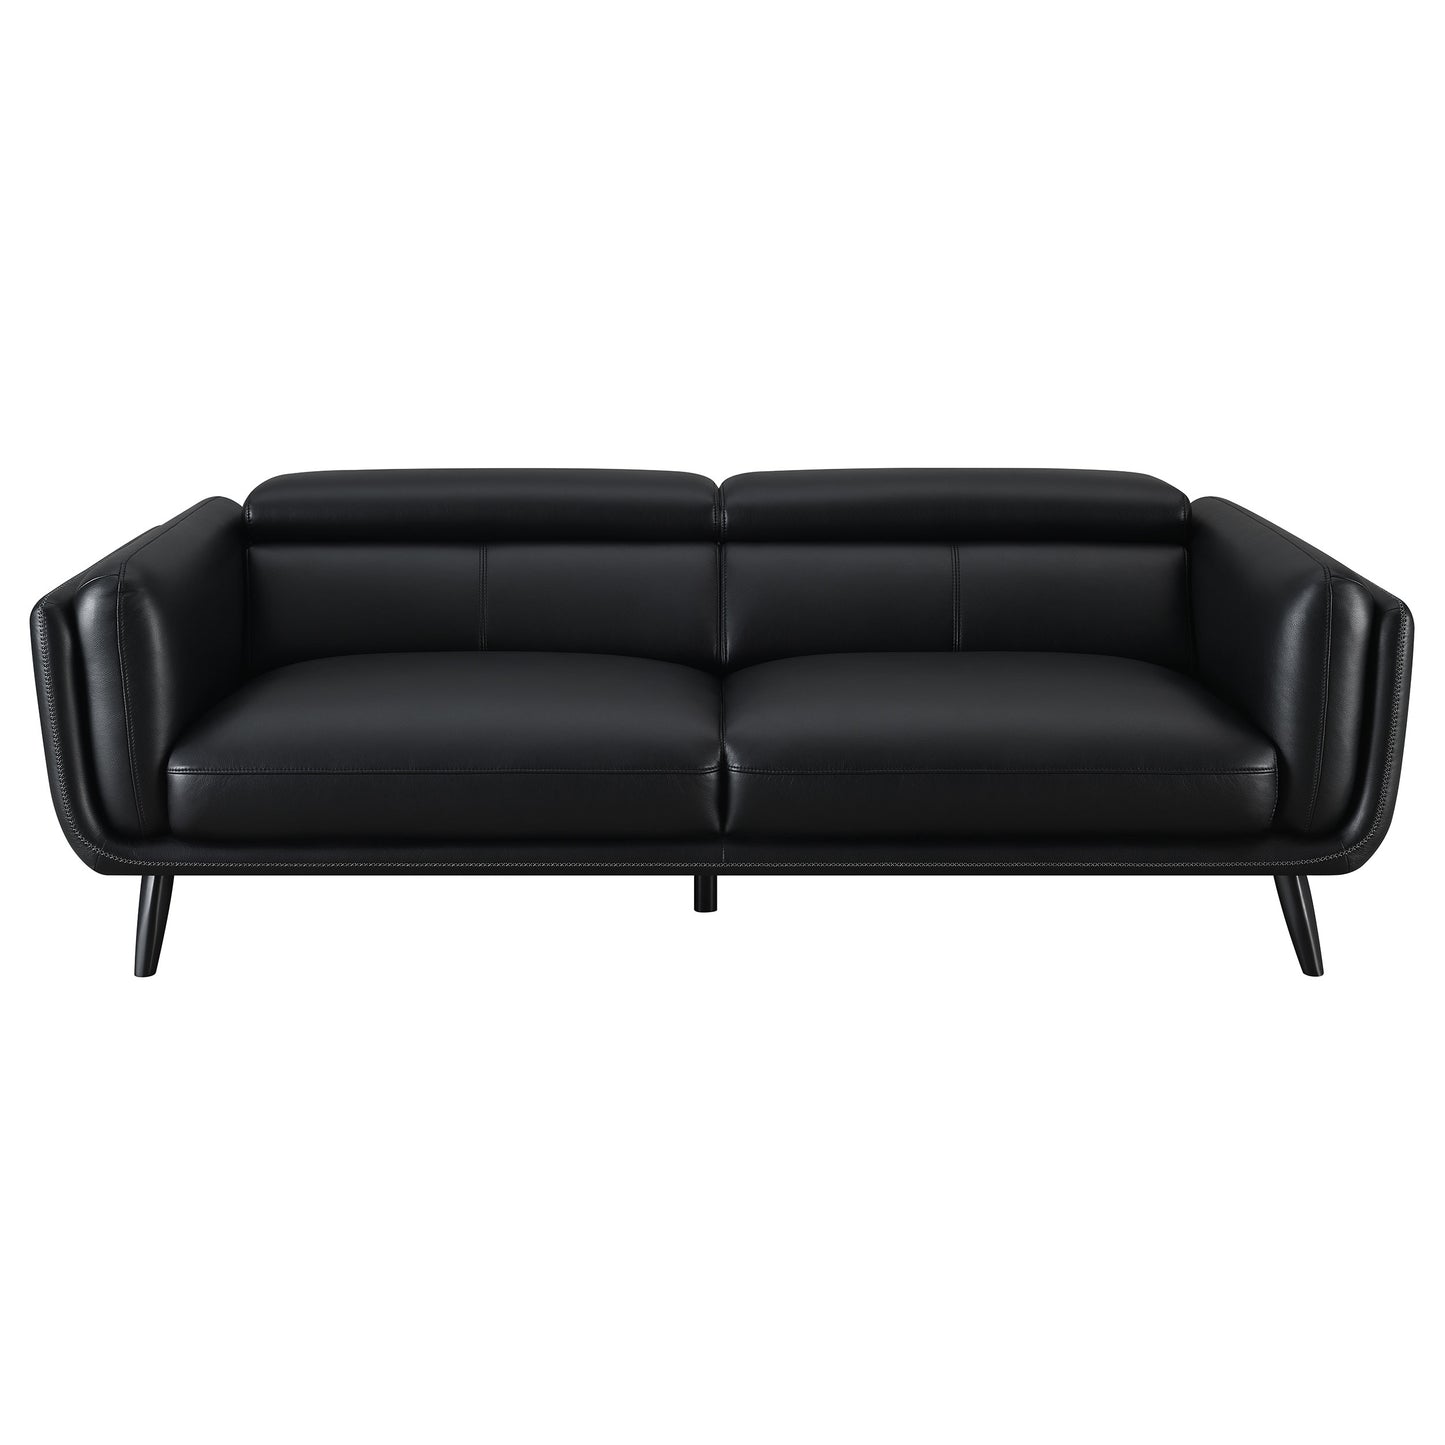 Shania Track Arms Sofa with Tapered Legs Black